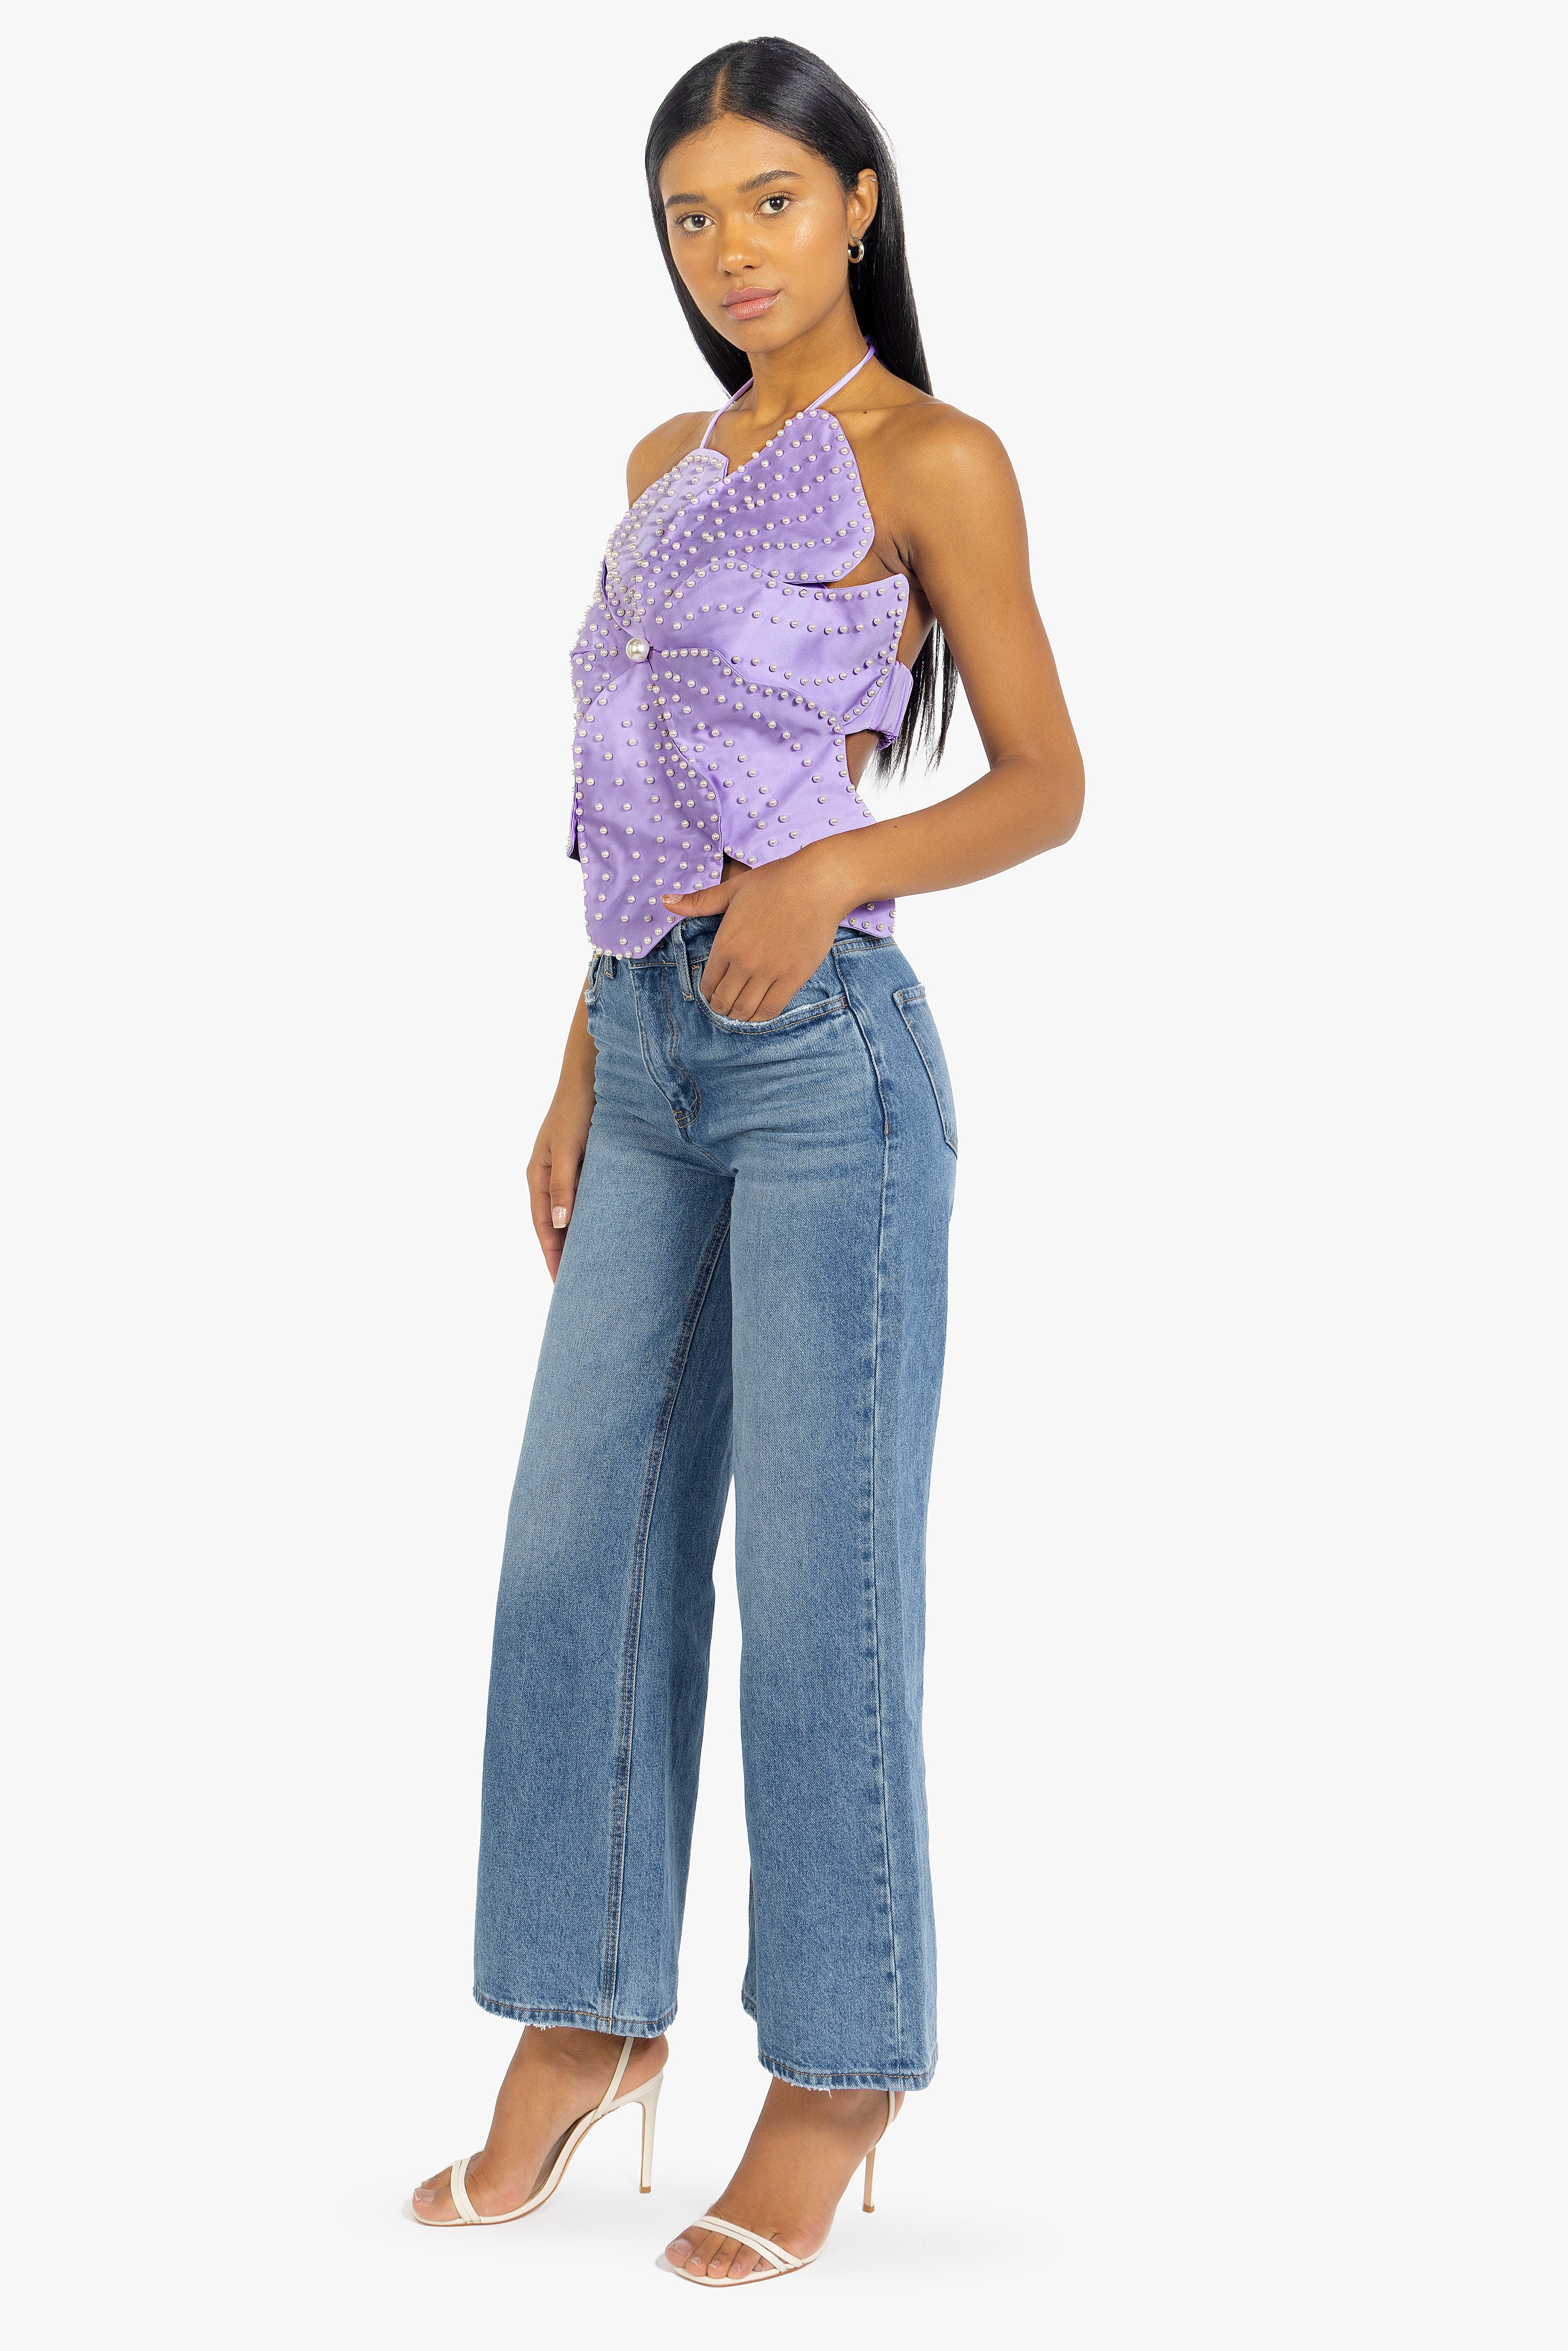 LILAC PEARLS FLOWER TOP